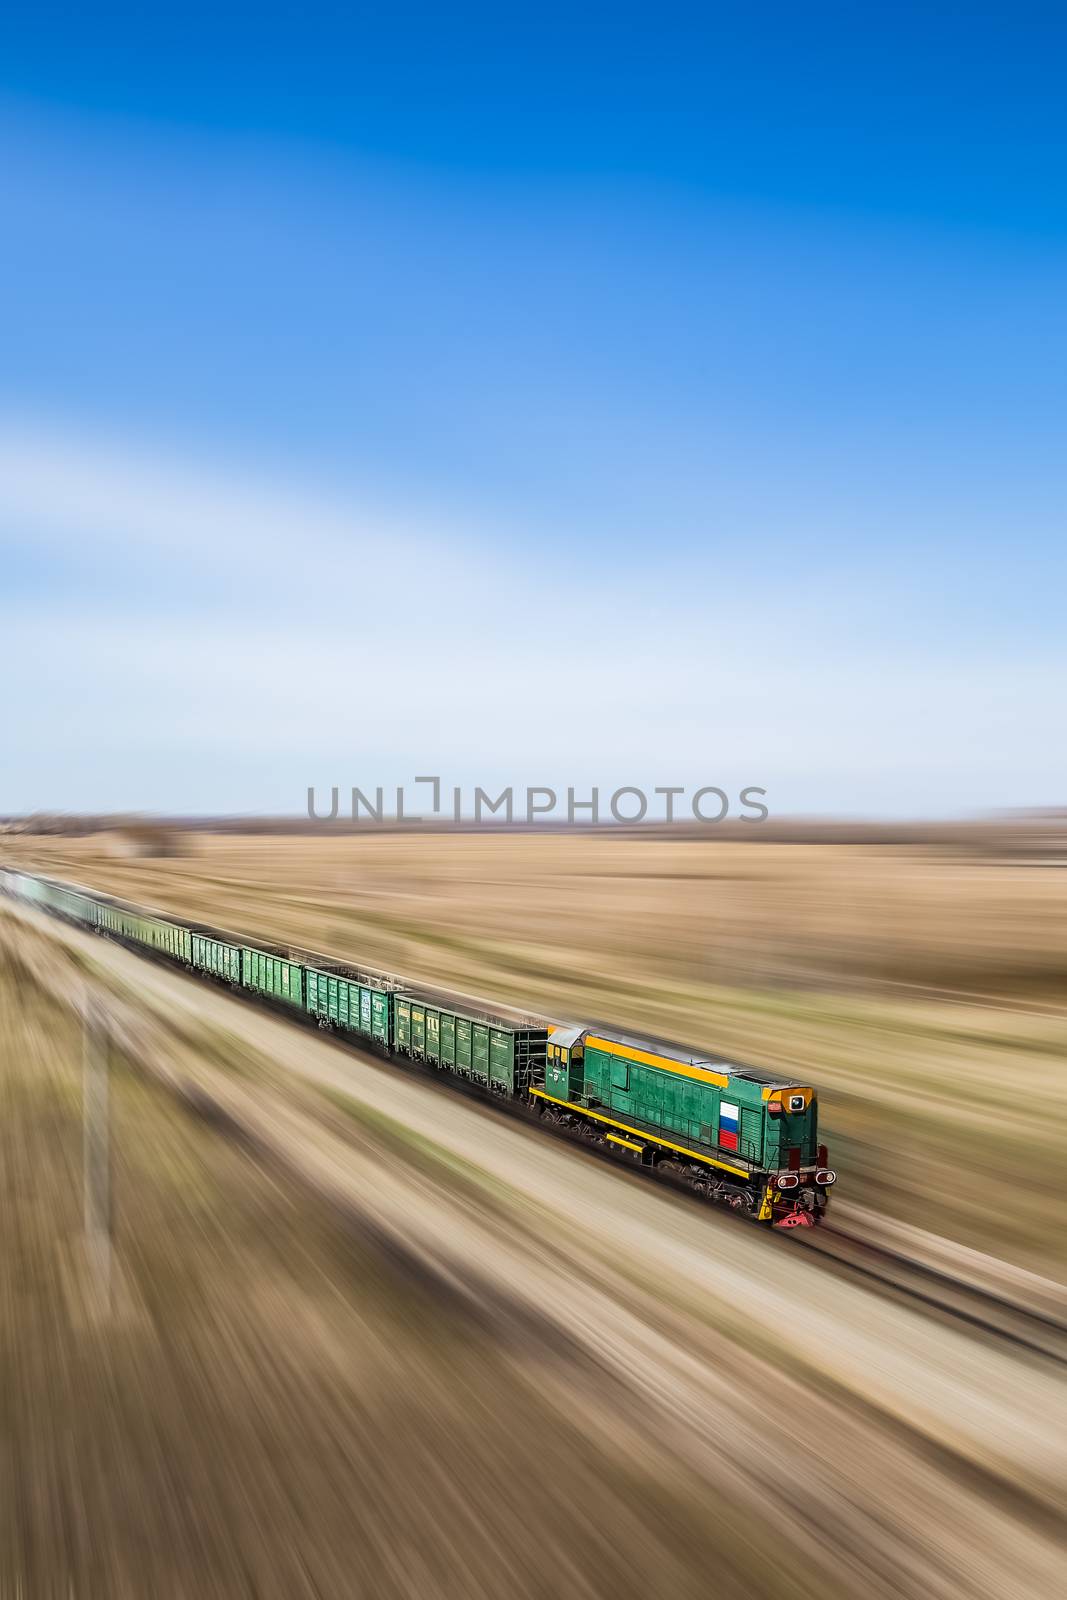 Perspective view of a moving train with Russian flag on it